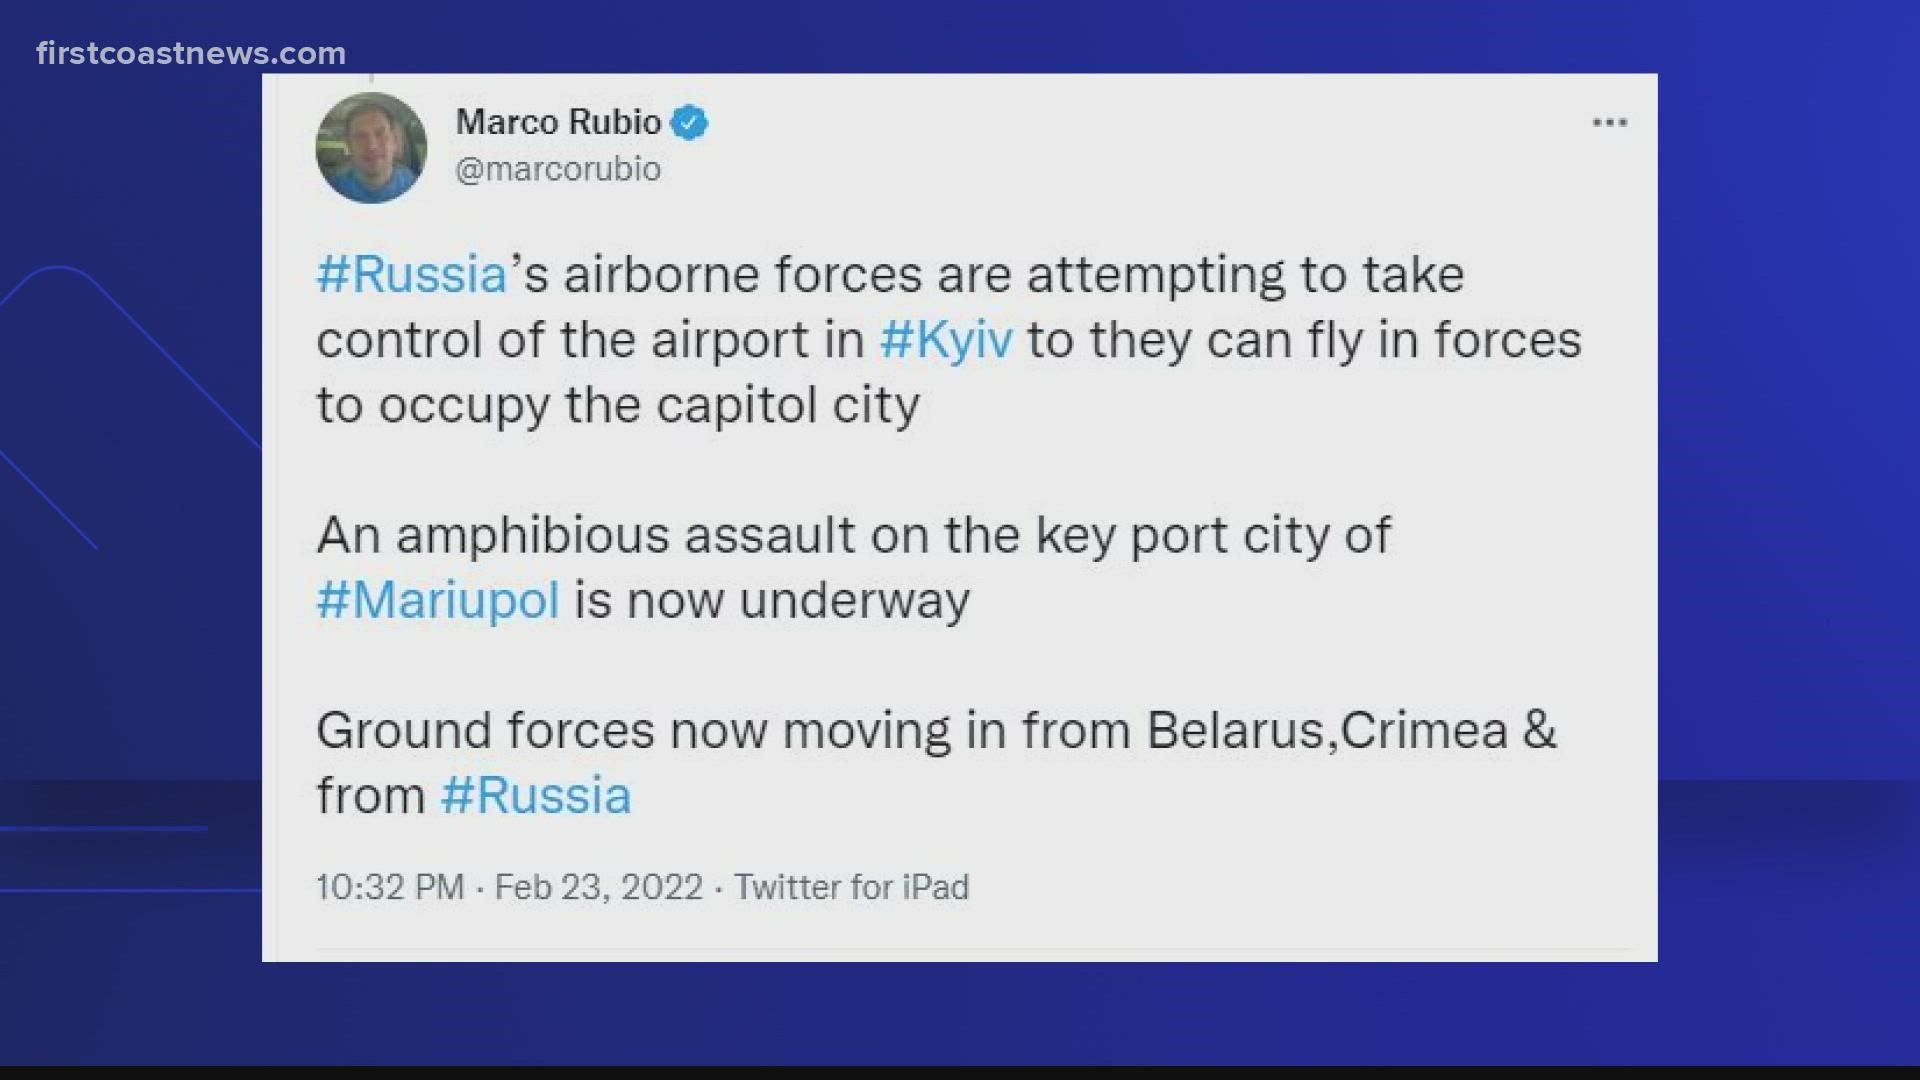 "#Russia isn’t just focused on seizing eastern #Ukraine. Russian military forces are working towards isolating #Kyiv at this very moment," Rubio said in one tweet.